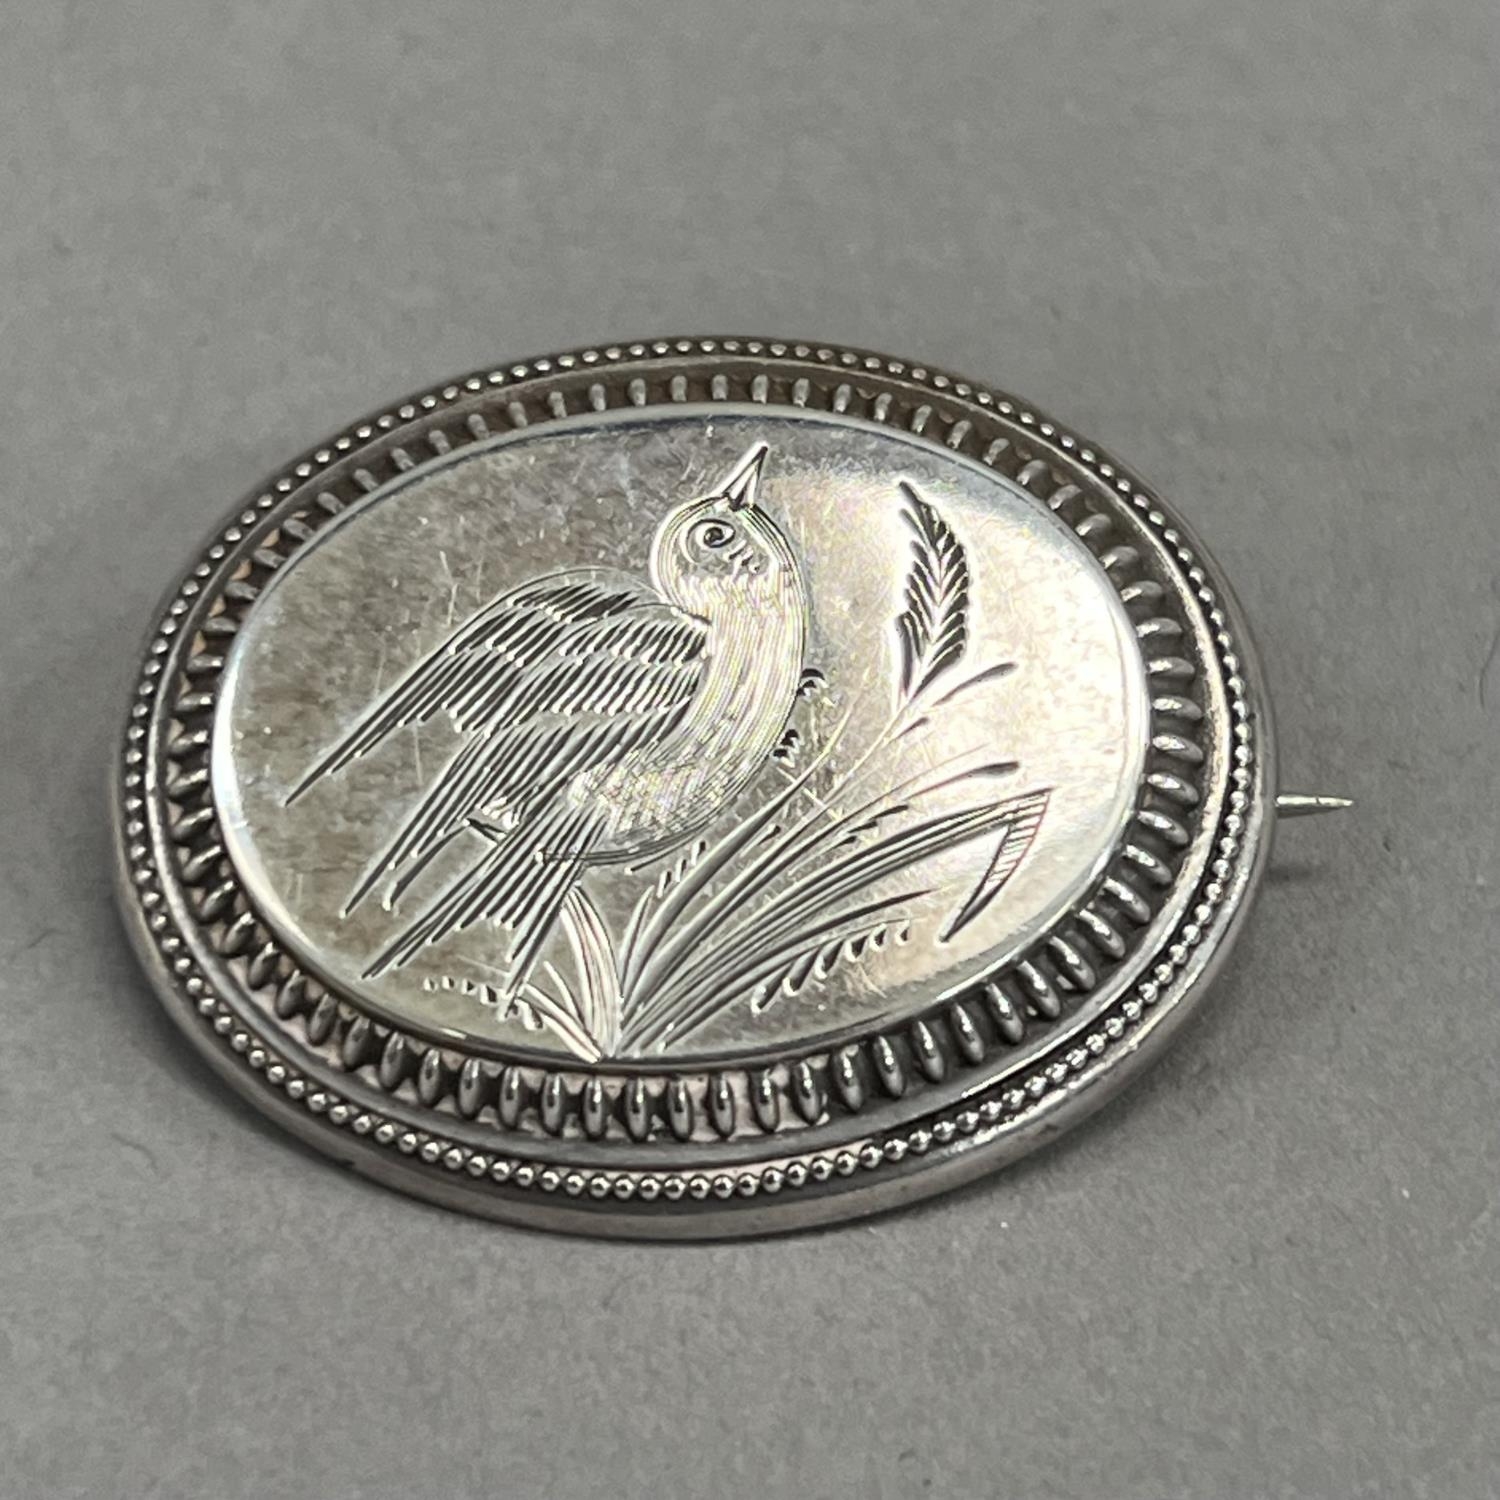 A Victorian oval silver brooch, engraved with a song bird perched in grasses raised against a - Image 2 of 2